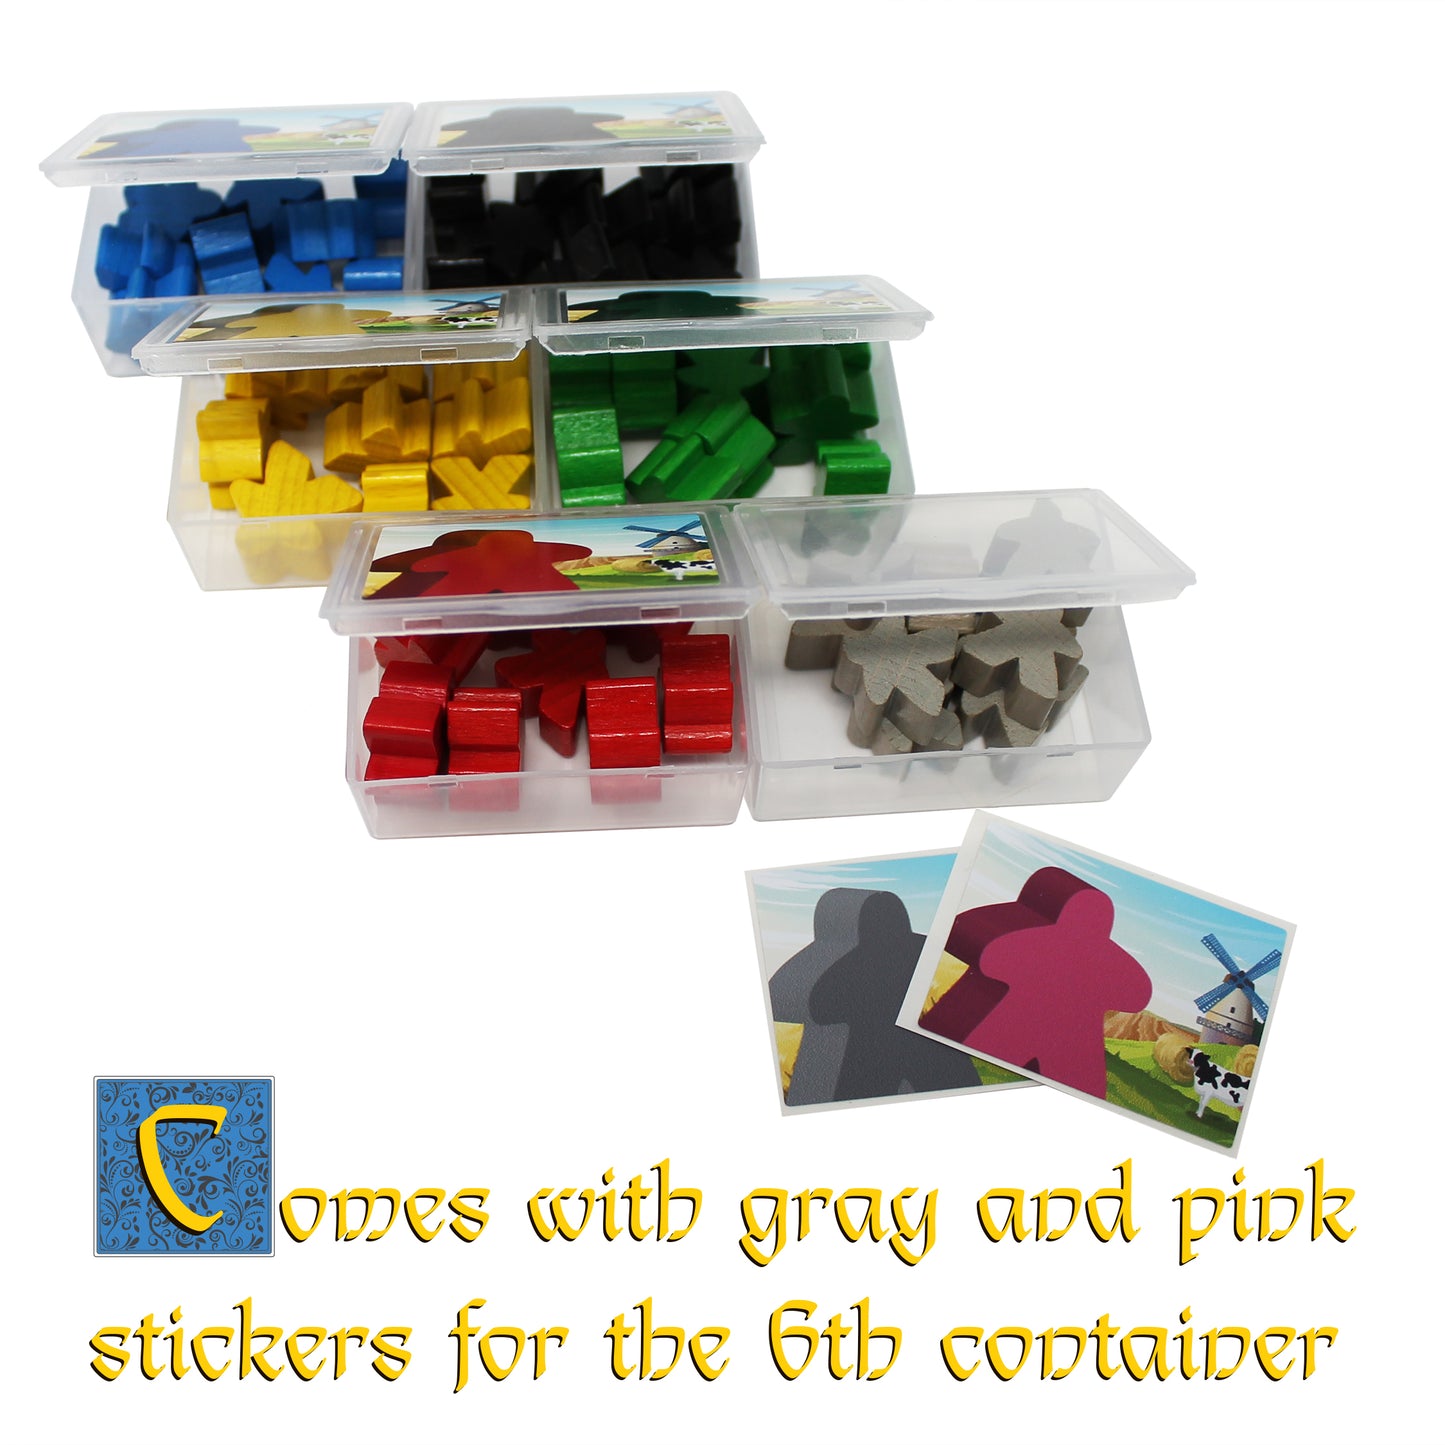 Meeple Storage Containers for Carcassonne, 6 Empty Bins to Organize and Separate Your Game Pieces